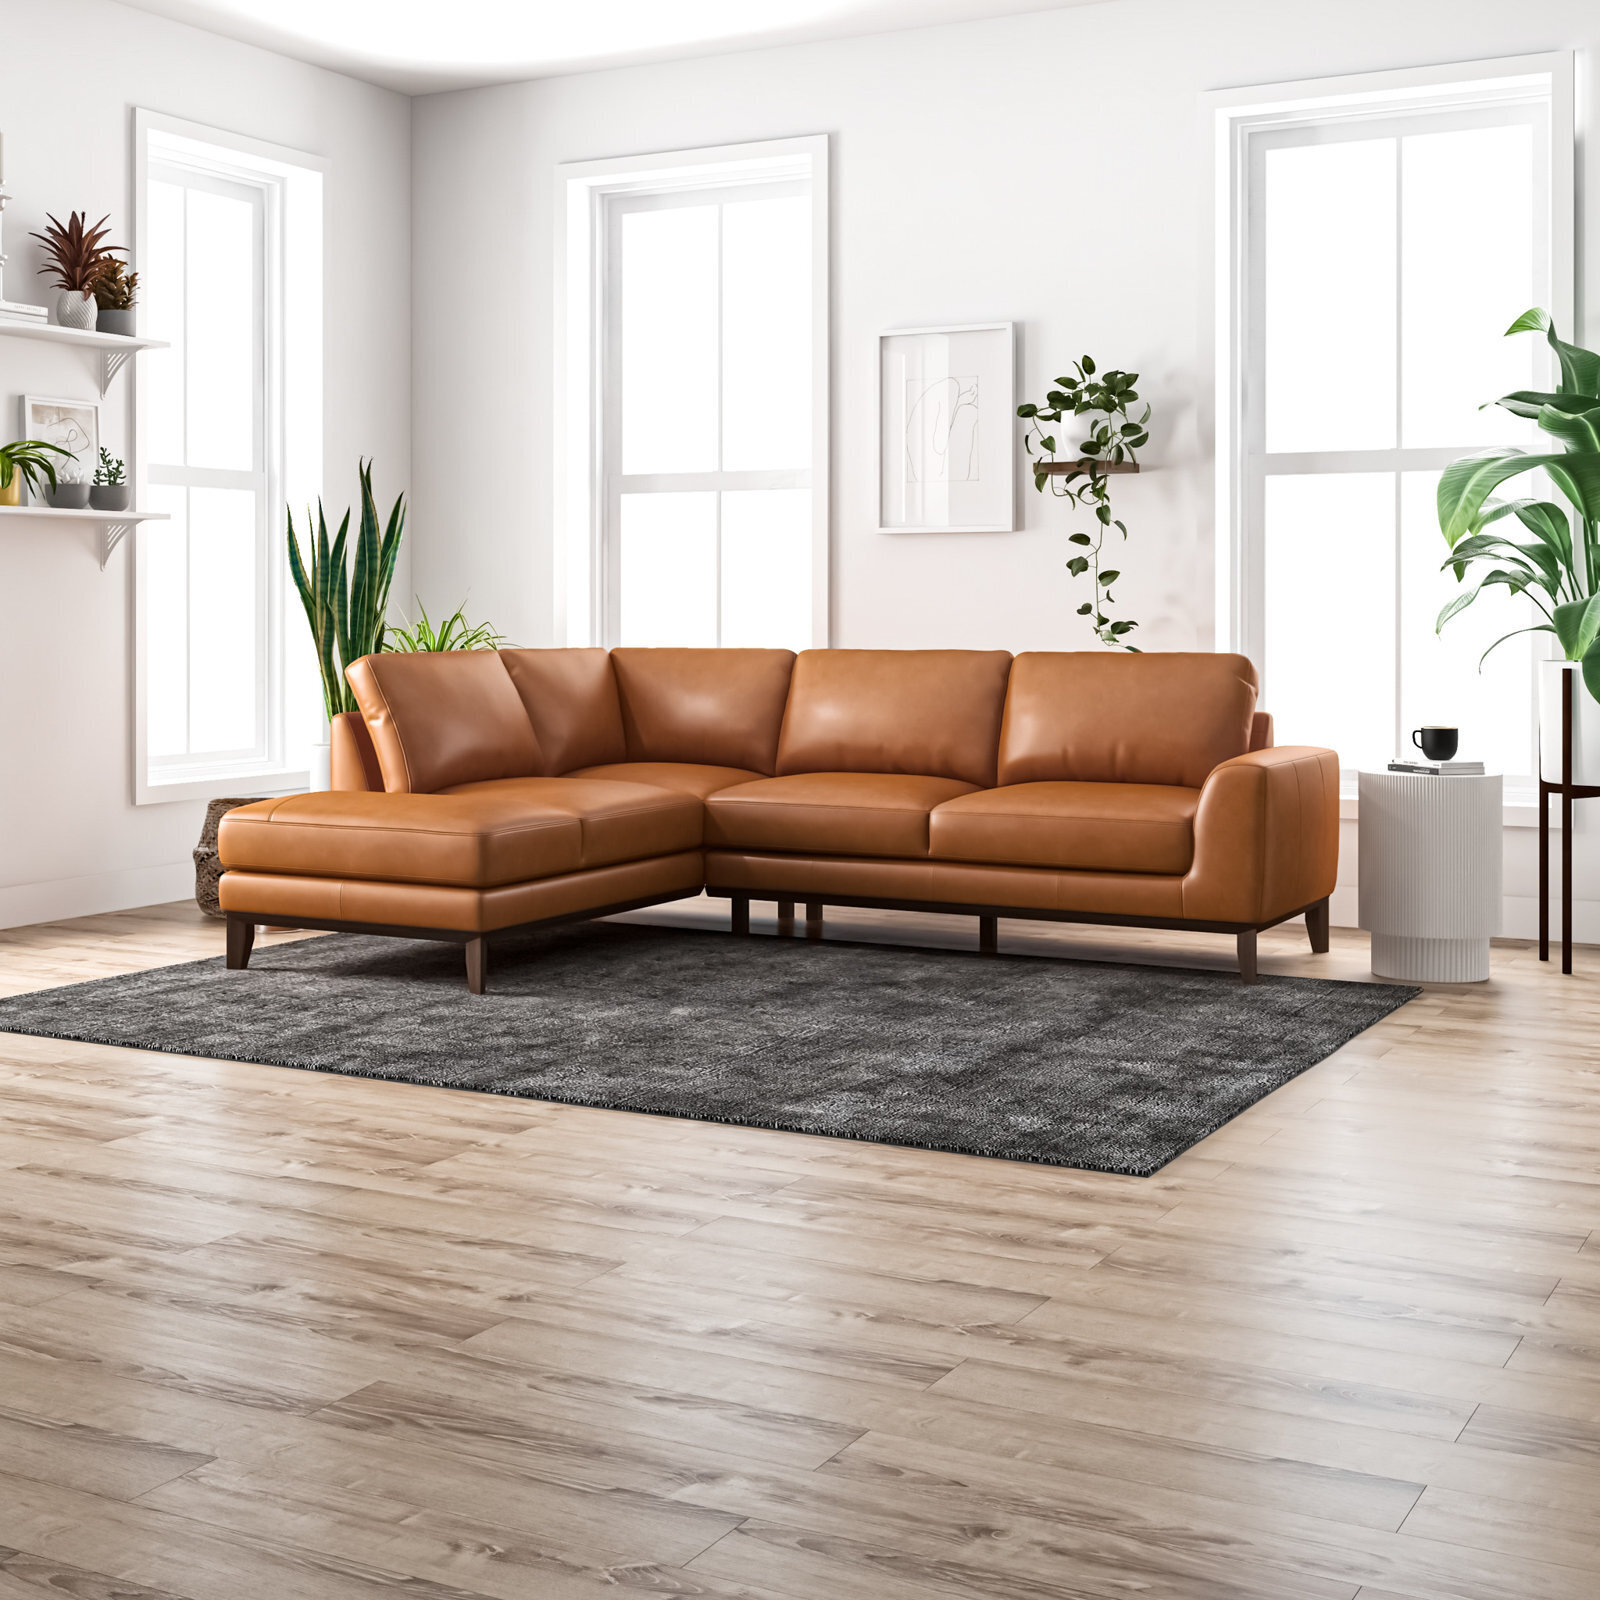 Tan Leather Chaise Sectional